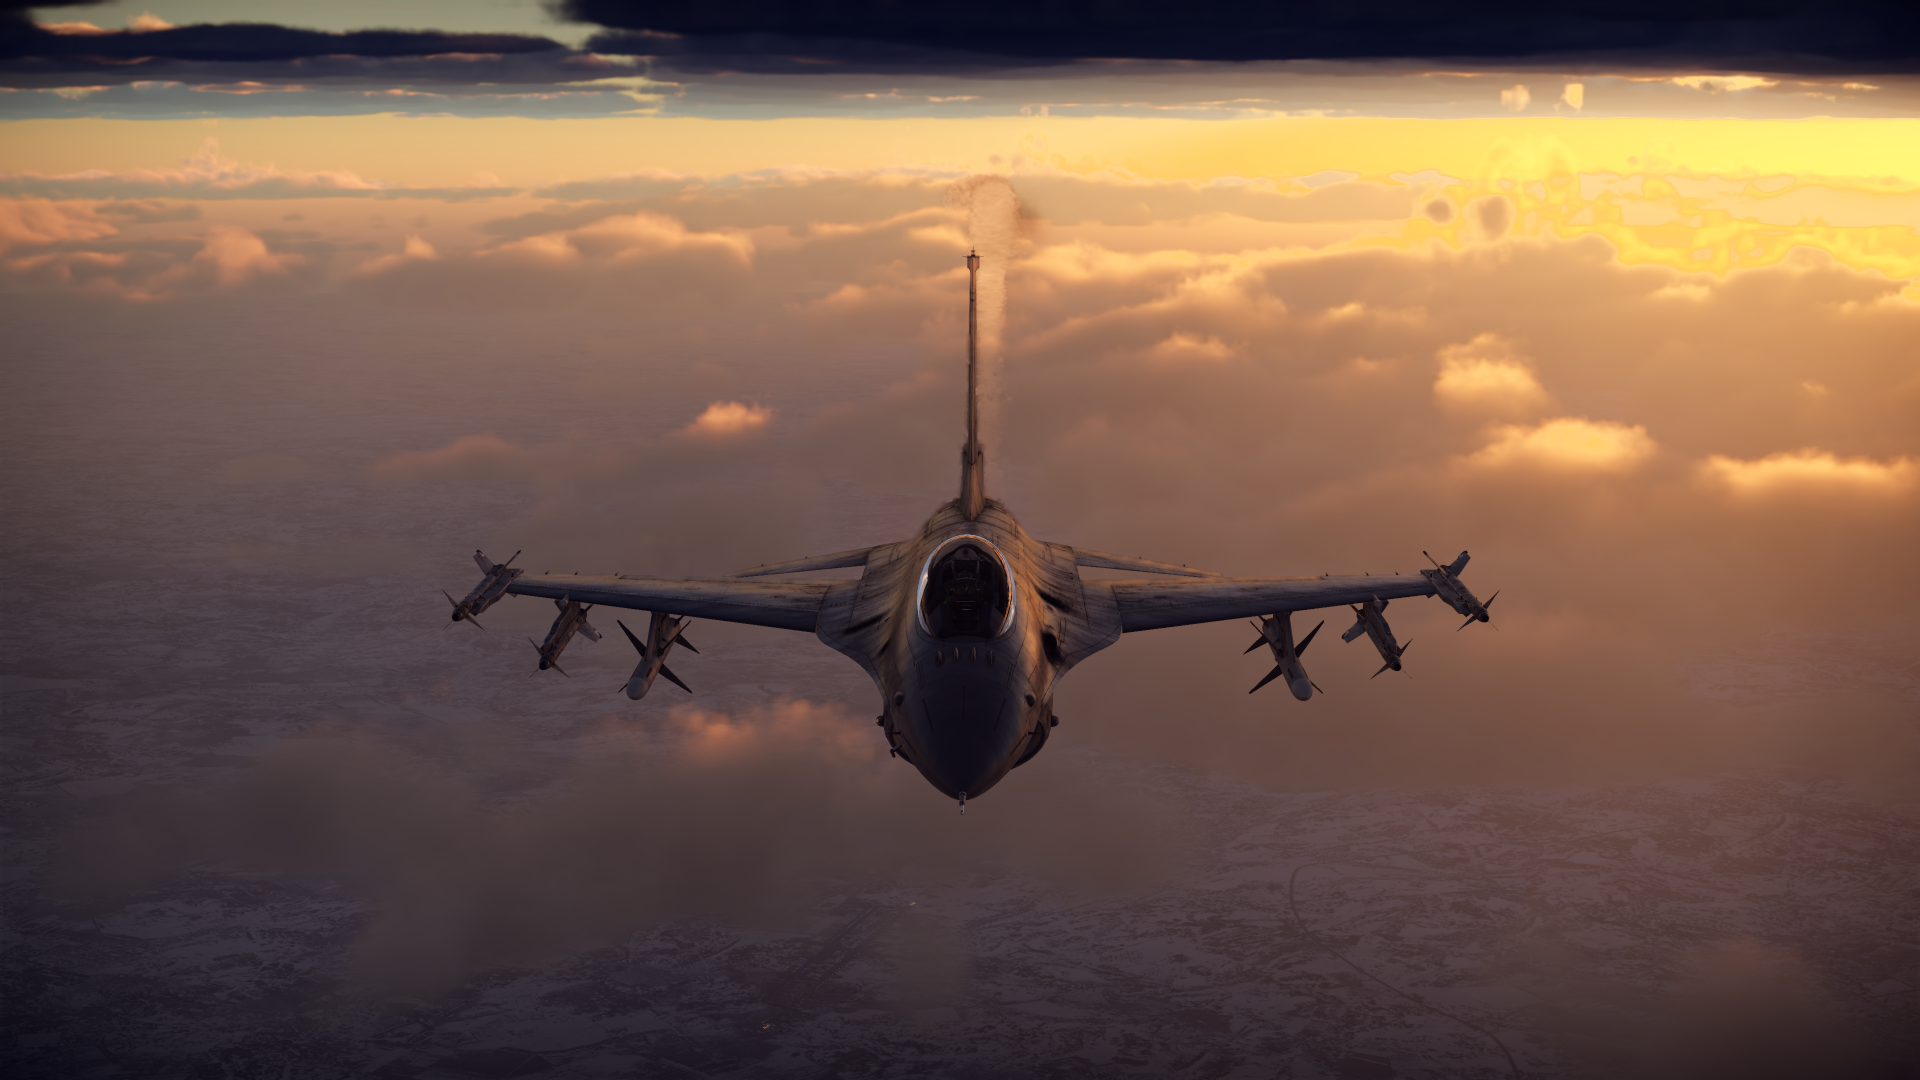 General 1920x1080 General Dynamics F-16 Fighting Falcon Taiwanese Air Force jet fighter airplane sunset video games clouds sky CGI sunset glow aircraft screen shot